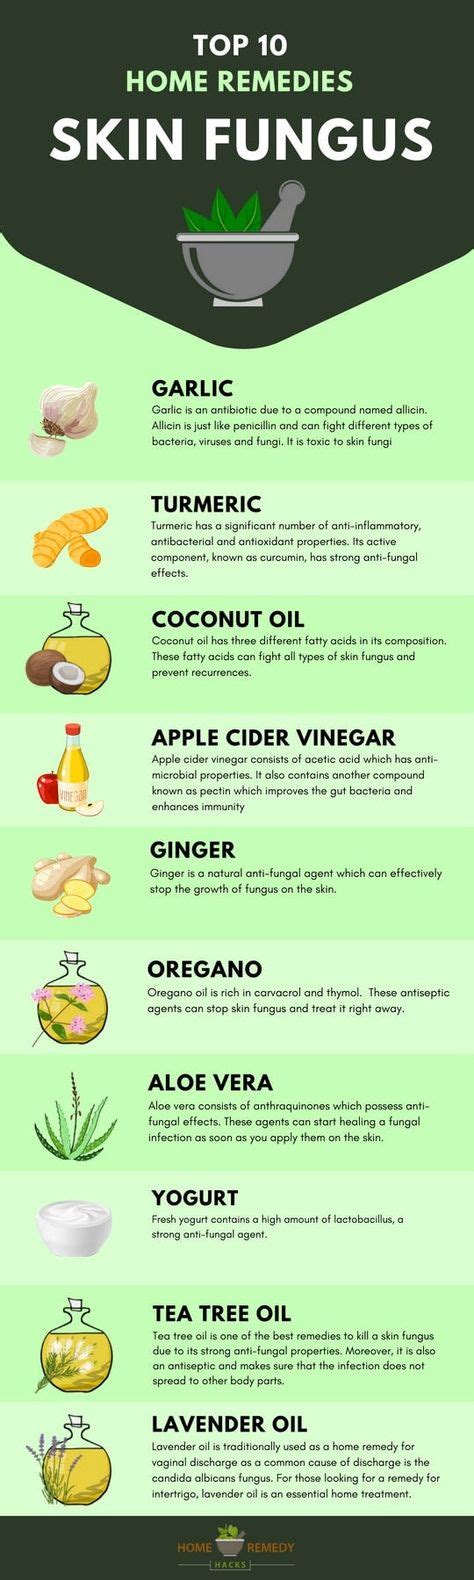 22 Amazing Home Remedies To Get Rid Of Skin Fungus Remedies Home